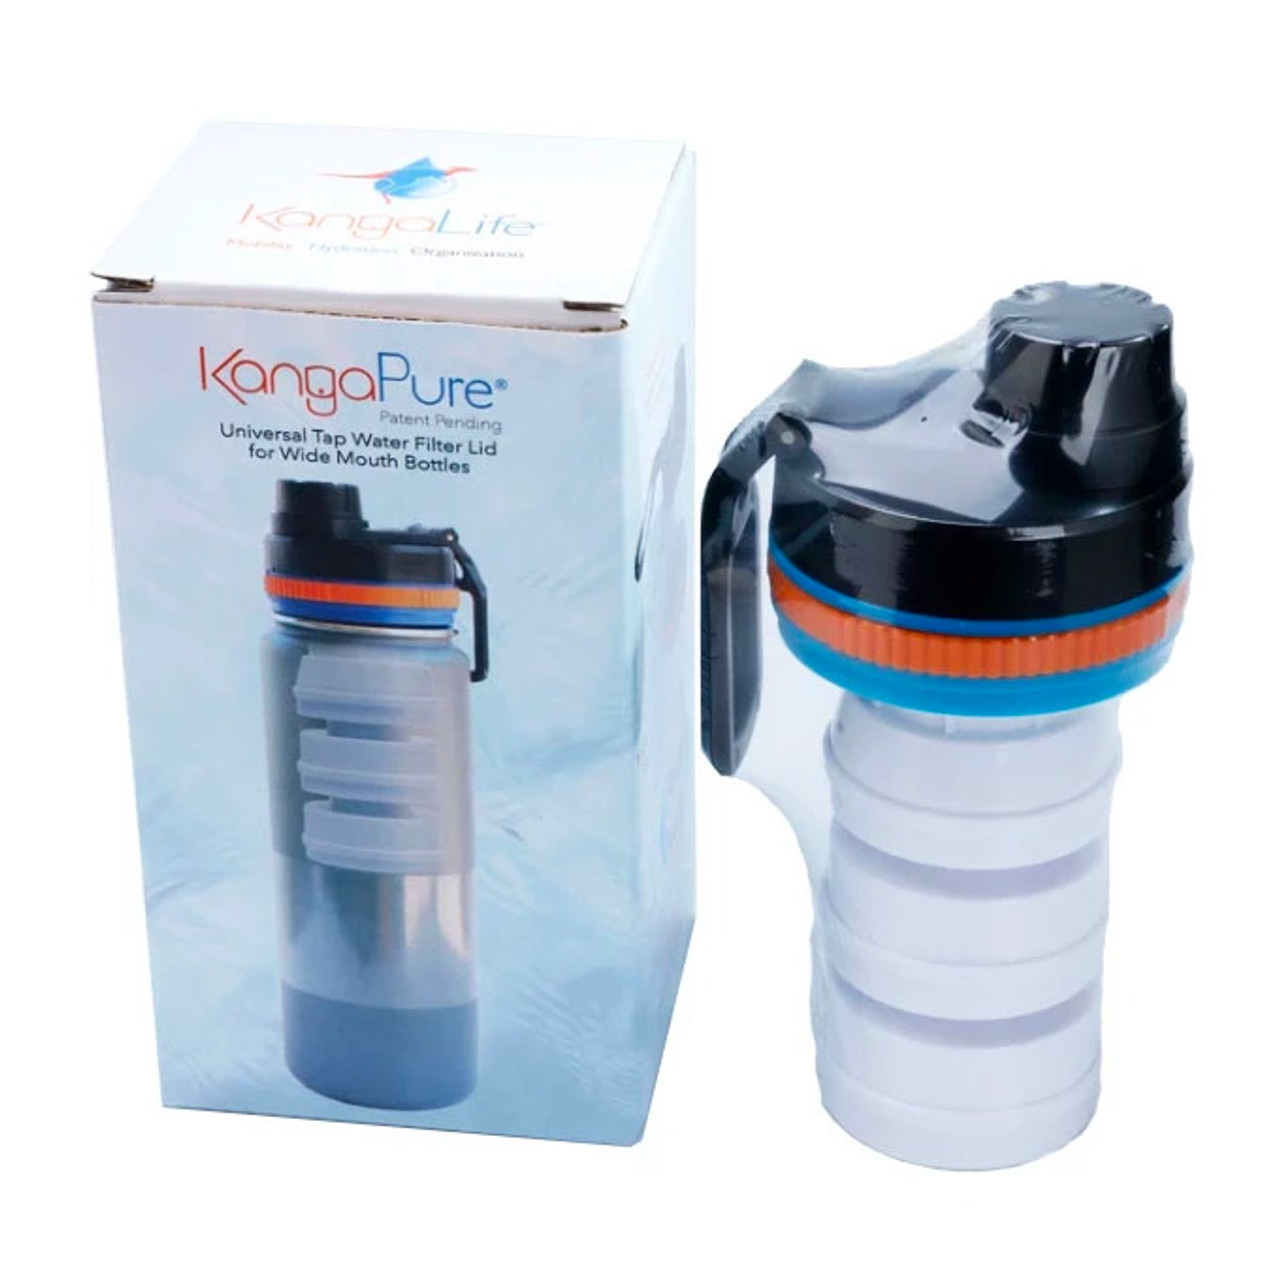 KangaPure Universal Tap Water Filter Lid for Wide Mouth Bottles - Includes  FREE Bottle and Sleeve! - HydroBlu